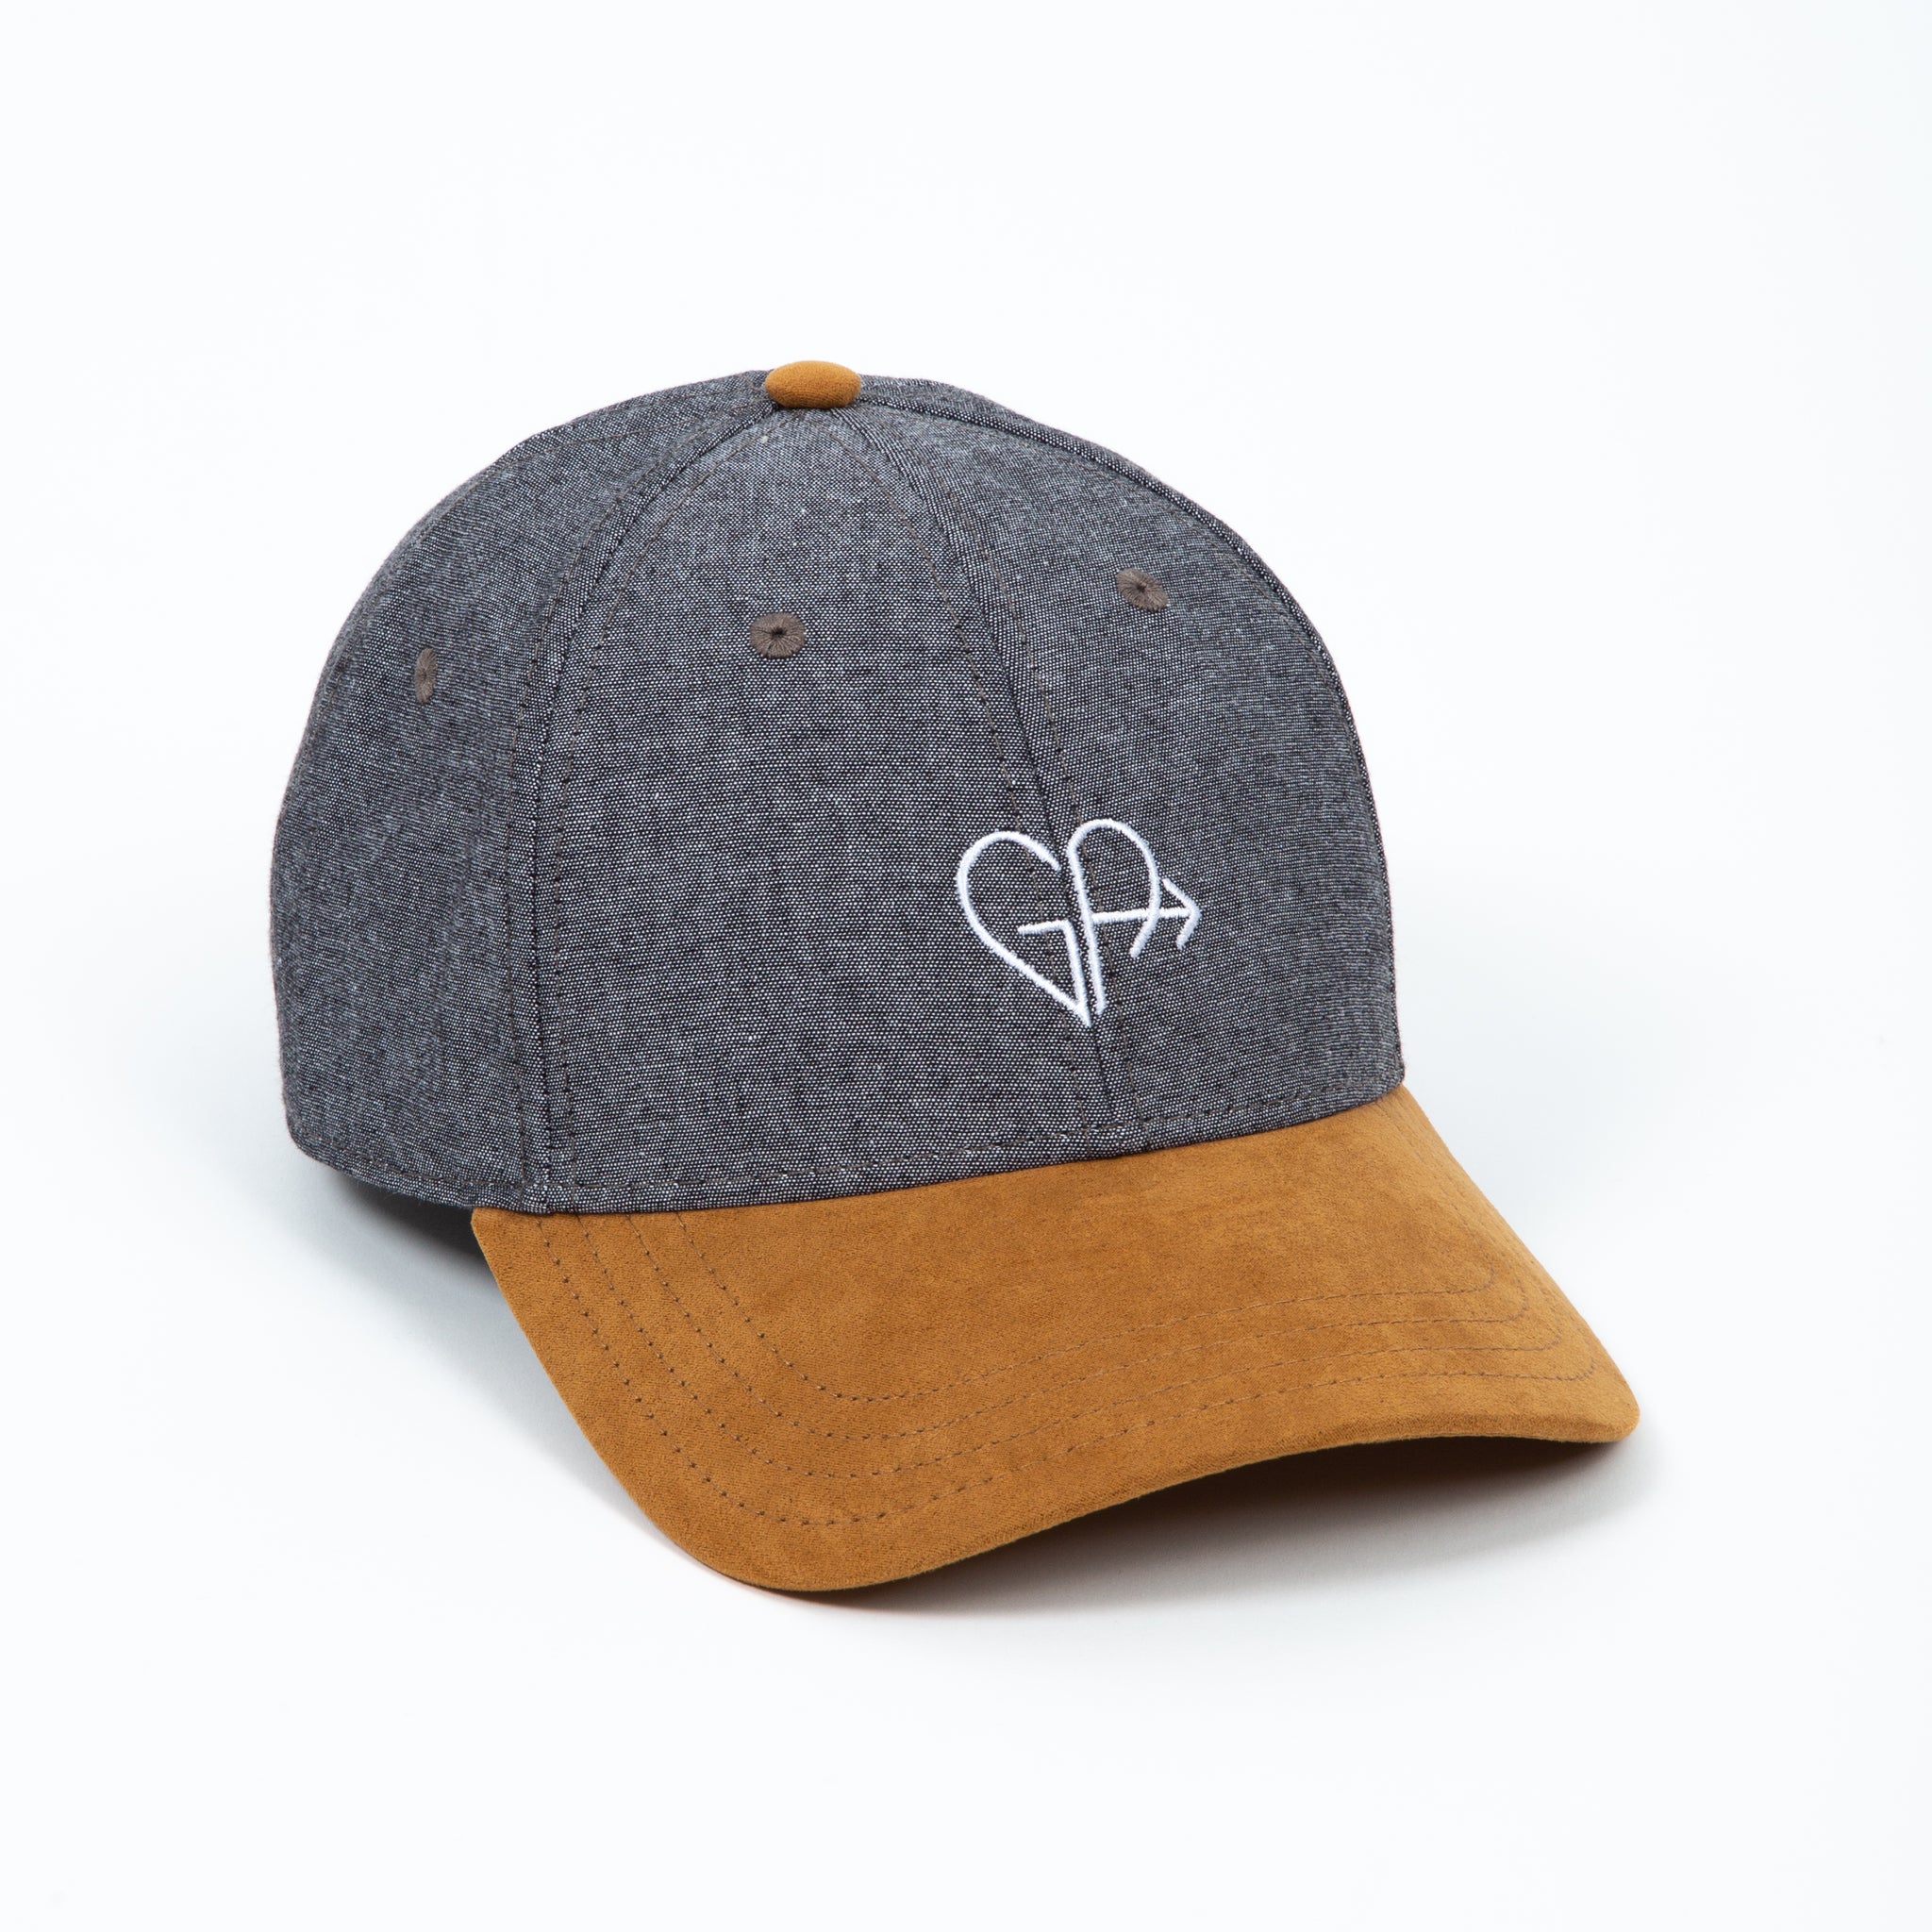 GA heart logo two tone suede and grey hat front Galey Alix